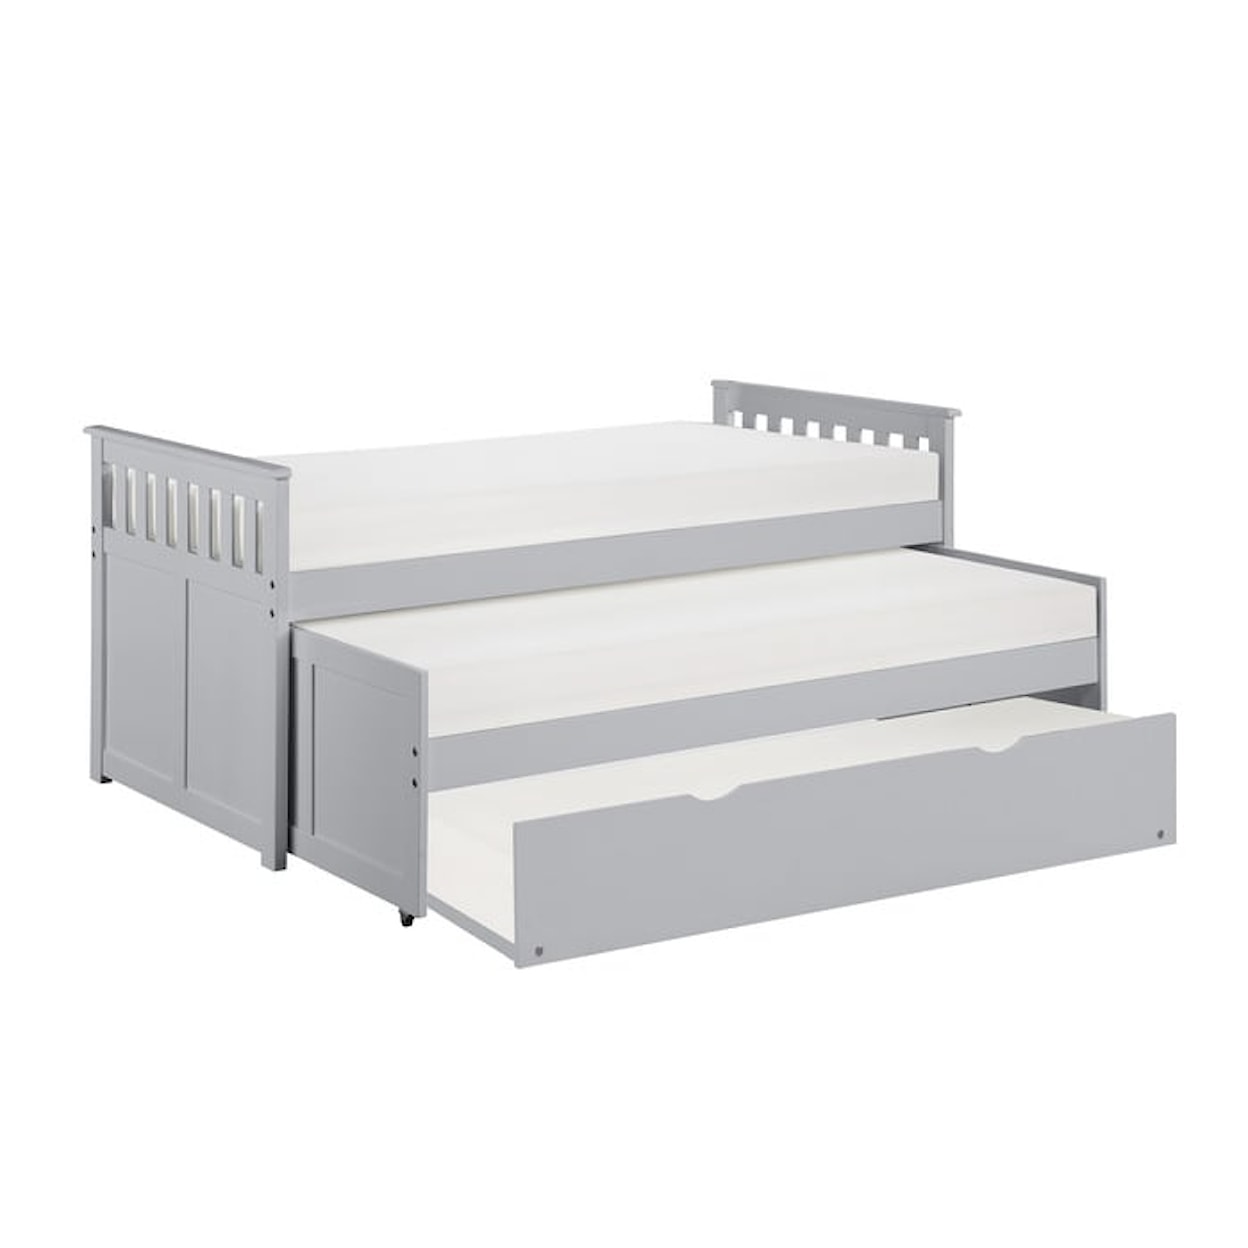 Homelegance Orion Twin Bed